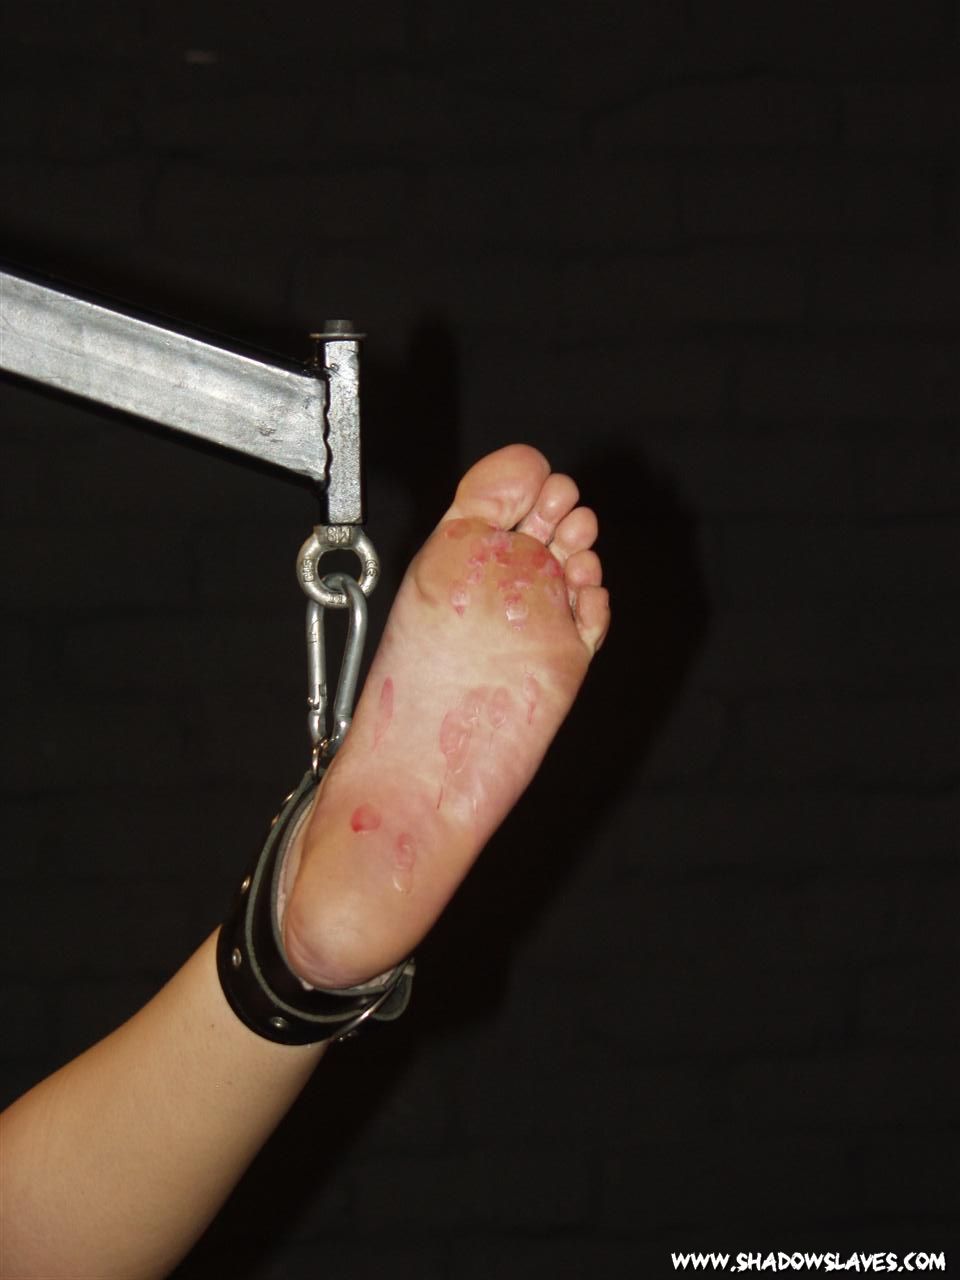 Bound Feet Punished And Foot Fetish Hotwax Punishment Of Restrained Bl Pichunter